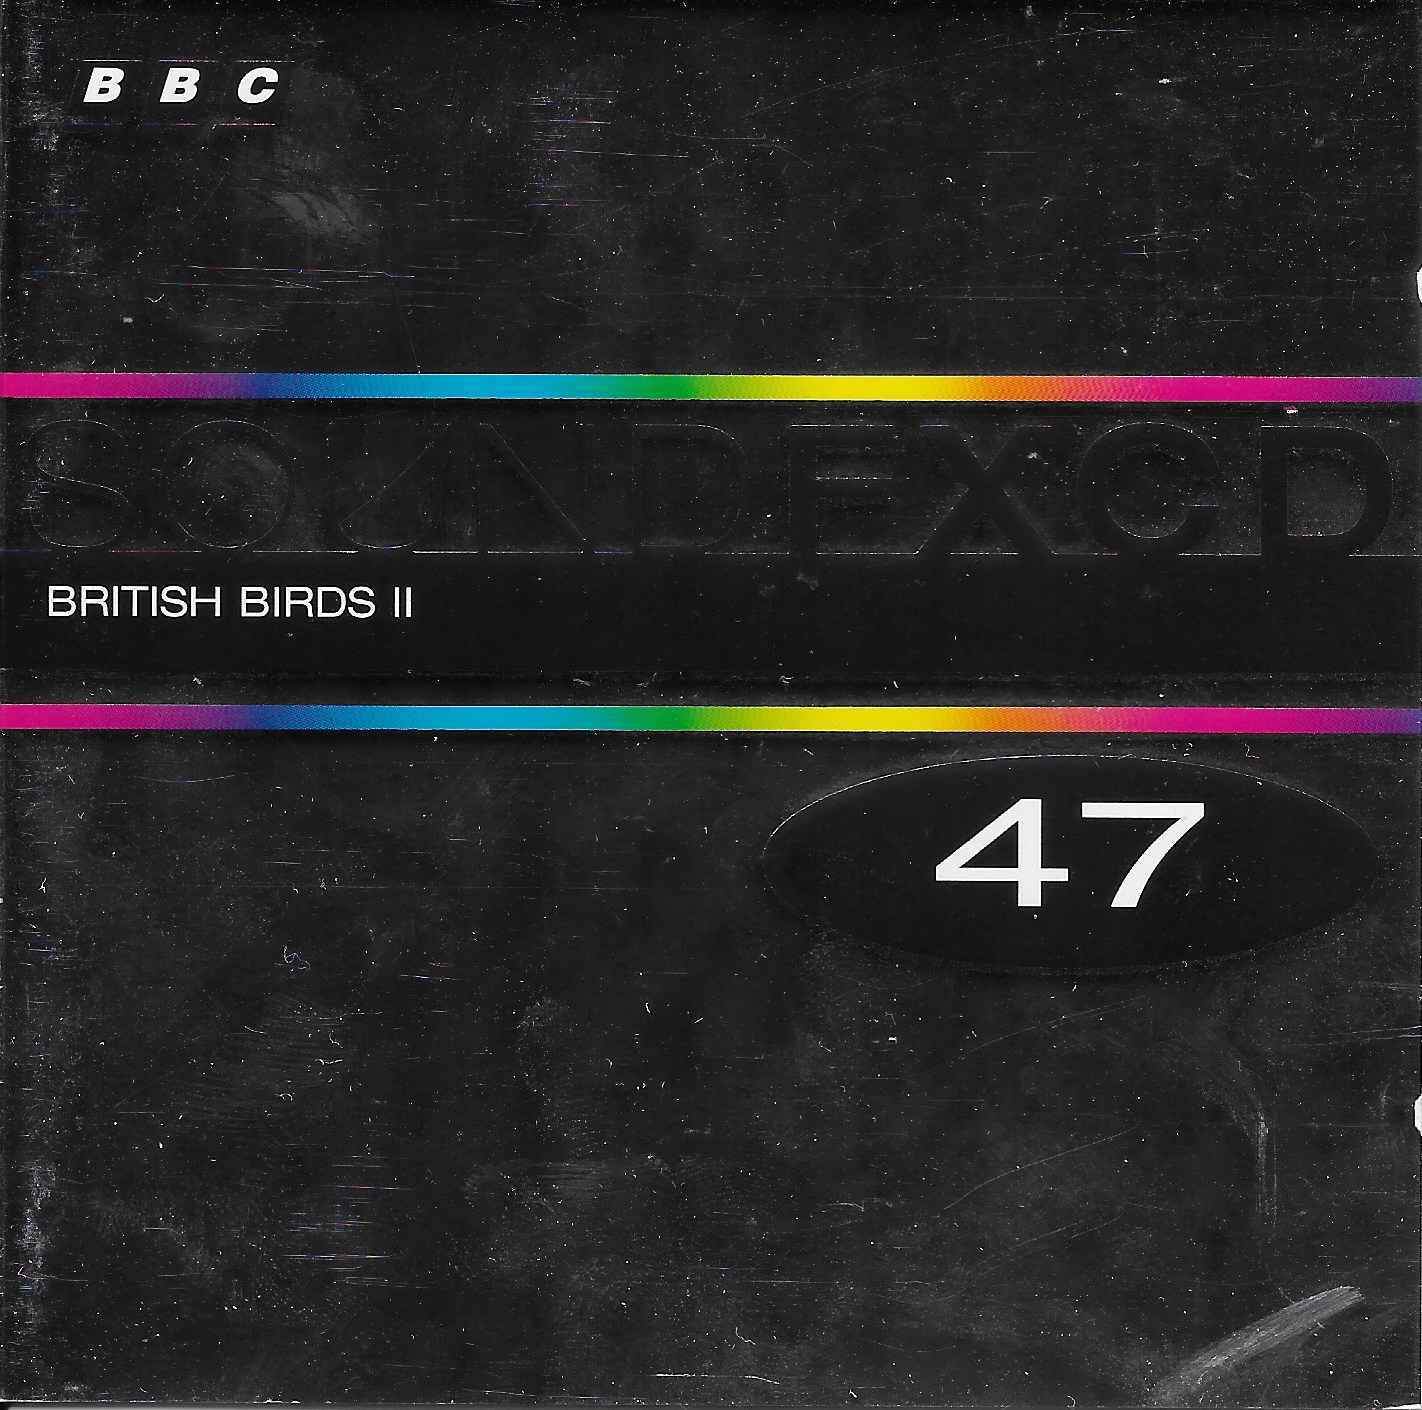 Picture of BBCCD SFX047 British birds by artist Various from the BBC cds - Records and Tapes library